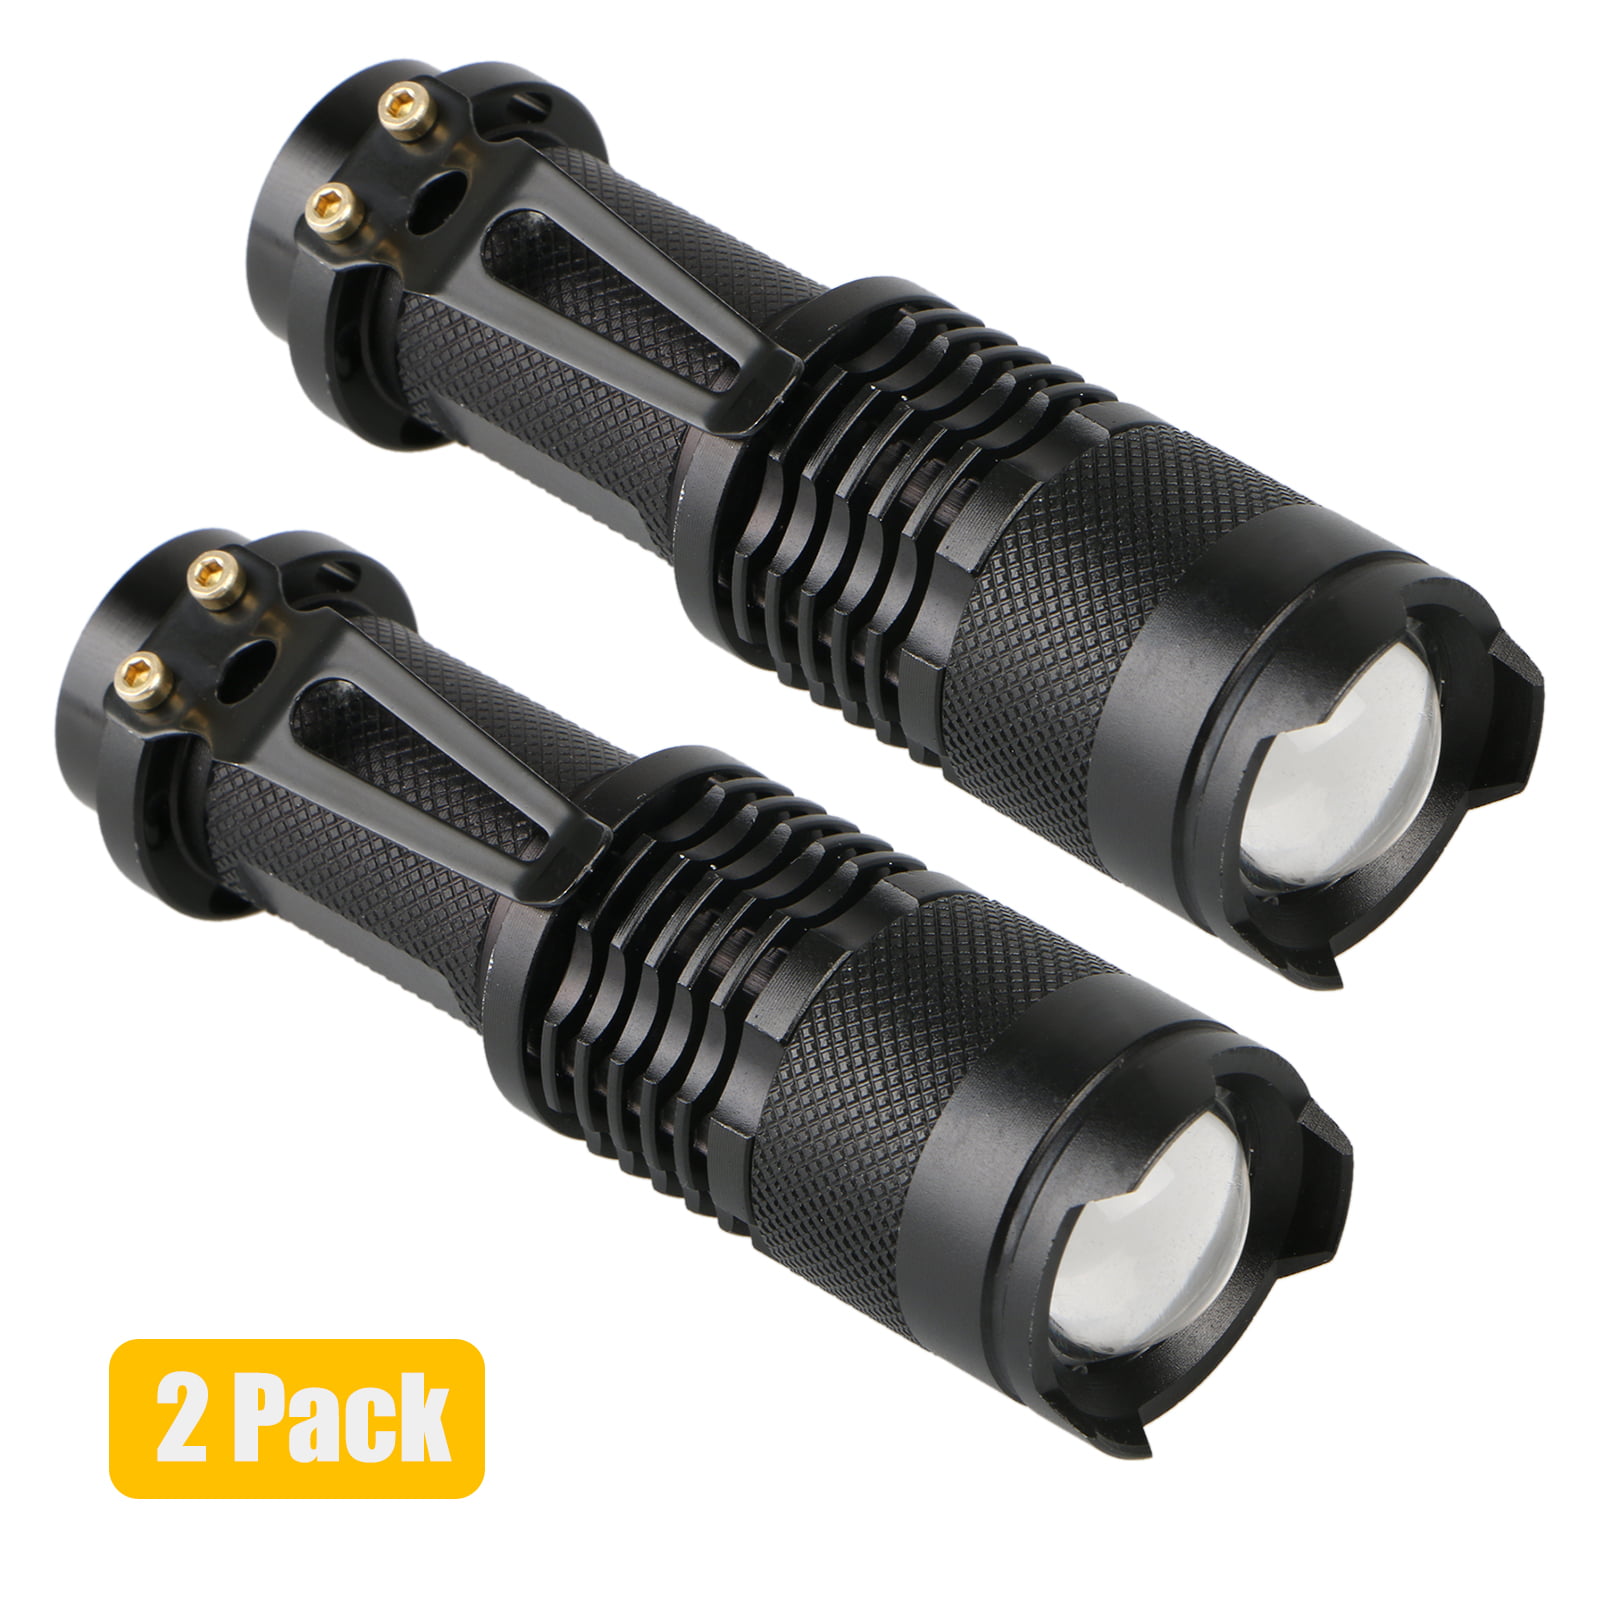 Details about   5Pcs 350LM Q5 LED Flashlight 1Mode Zoom Torch Mini Penlight Lamp Waterproof NEW 